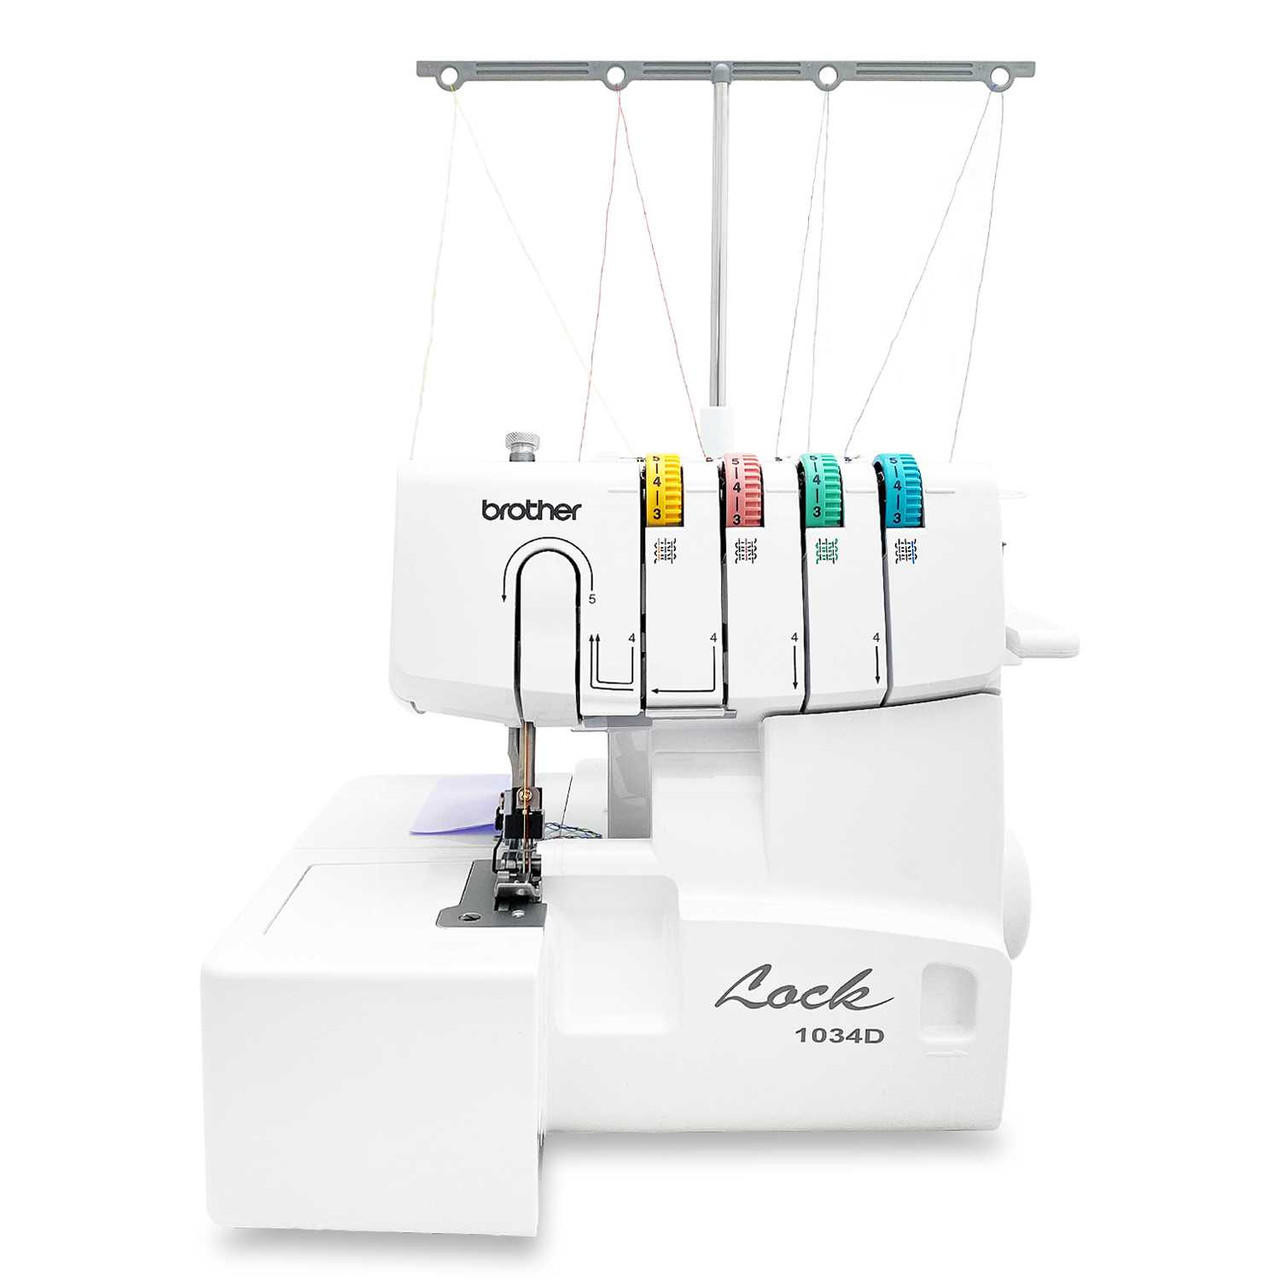 Brother 1034D Homelock Serger